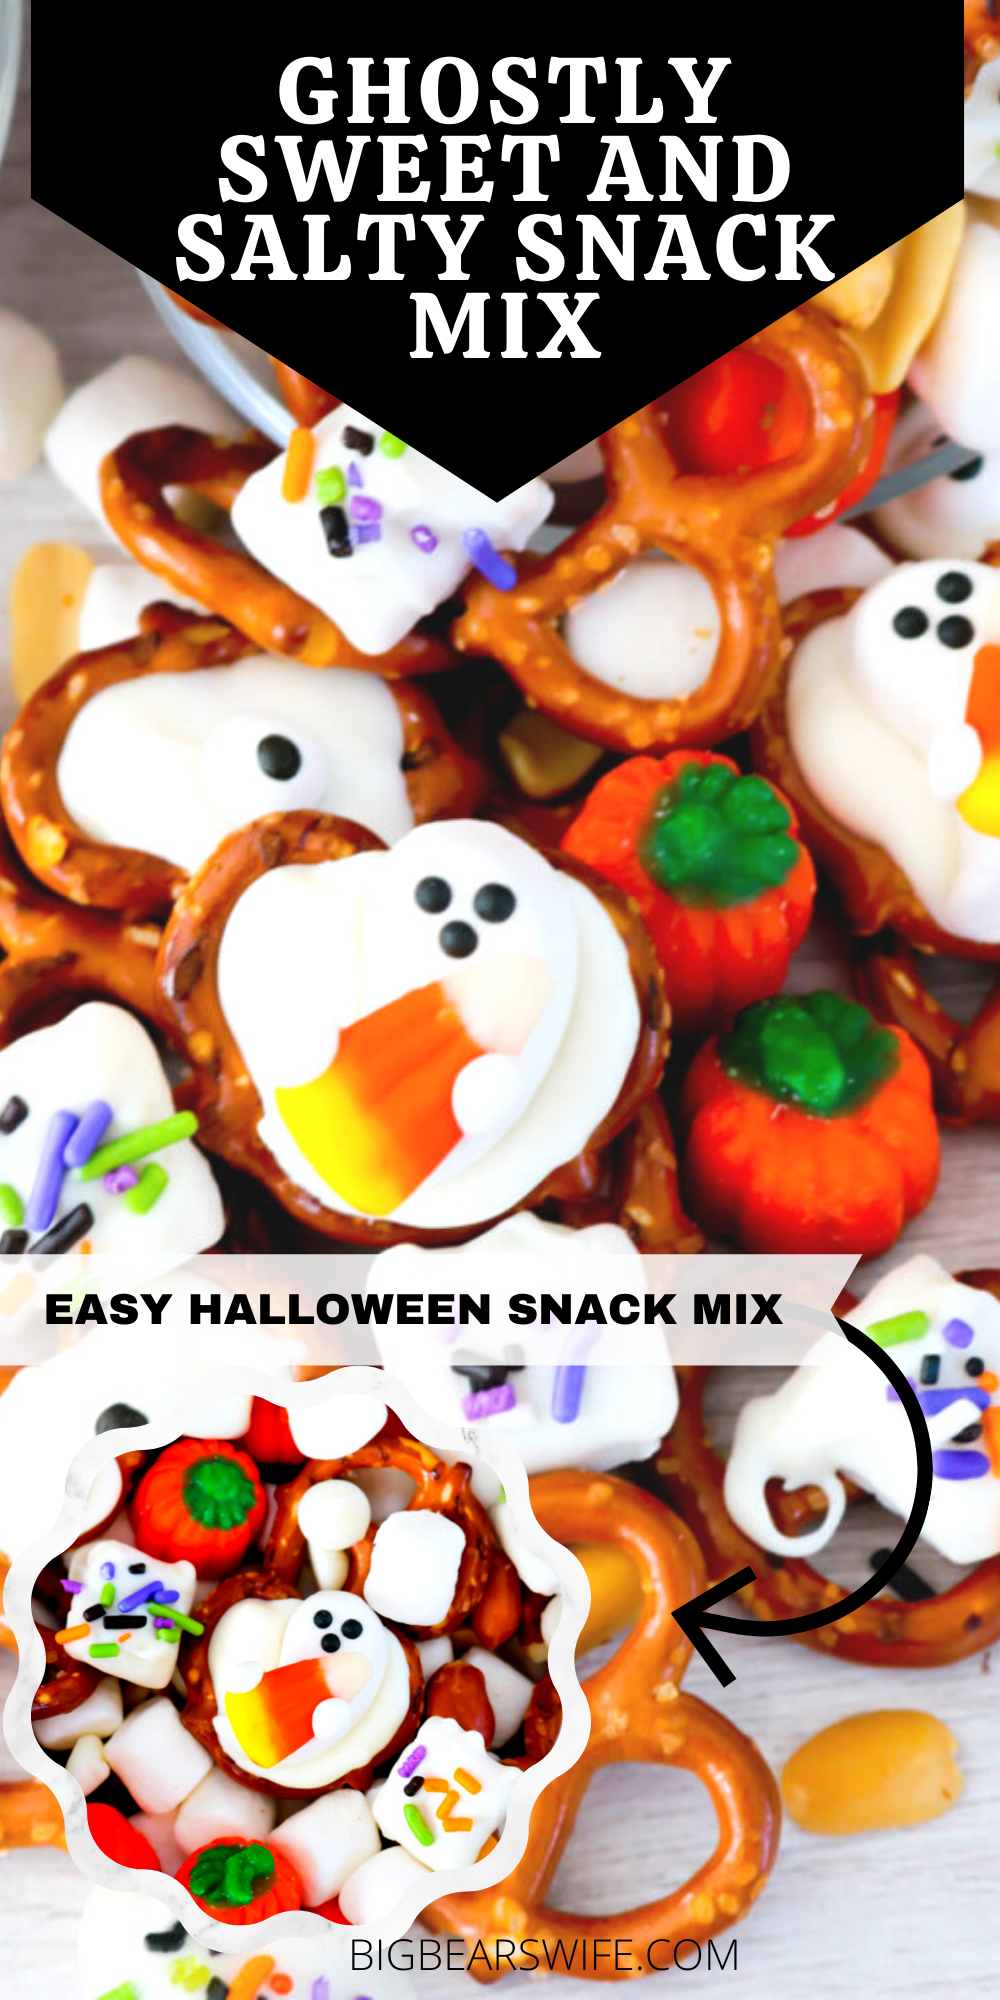 Treat your friends and family with this spooktacular Ghostly Sweet and Salty Snack Mix at your next Halloween Party! Leave the recipe as is or change it up to add whatever you like!  via @bigbearswife